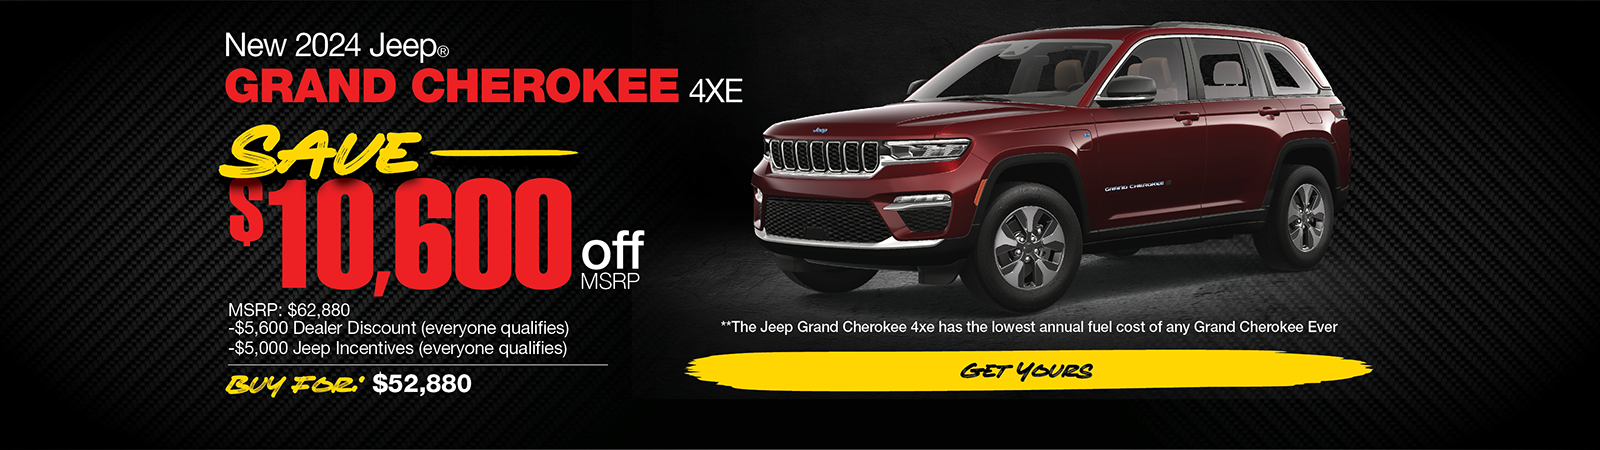 IL DEALER JEEP GRAND CHEROKEE 4XE SPECIAL